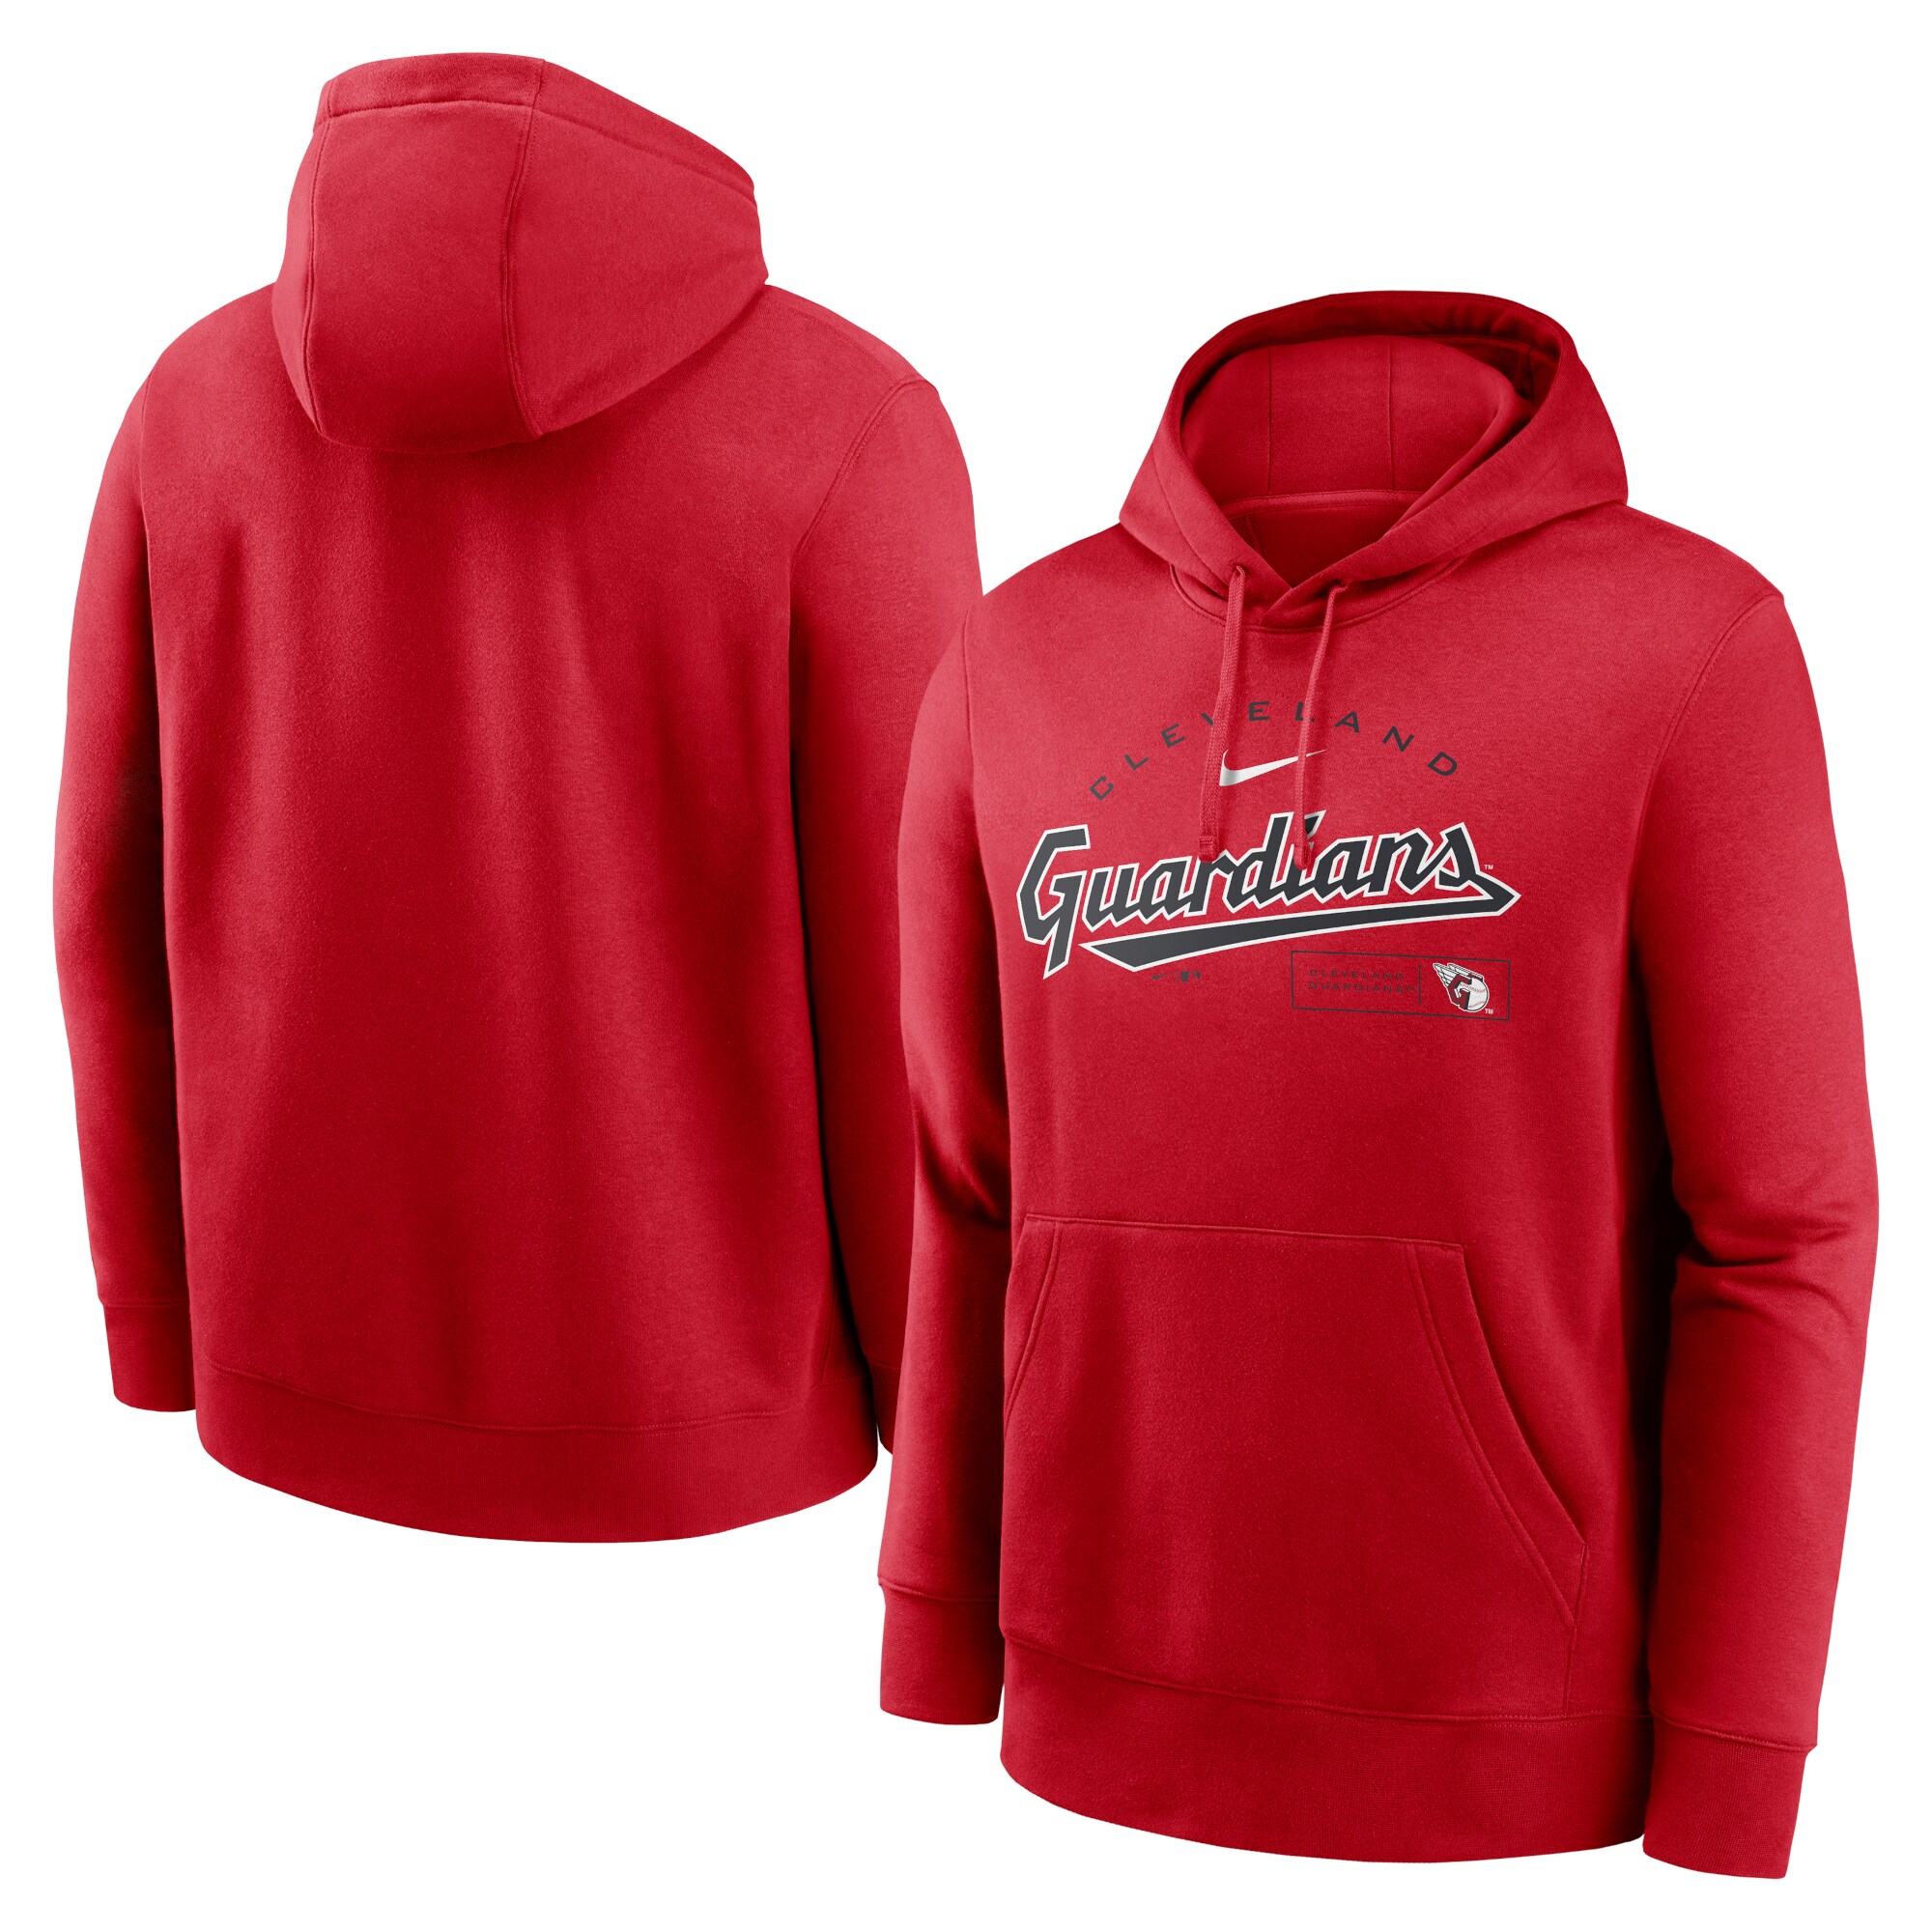 Cleveland Guardians merchandise is now available online on Fanatics 